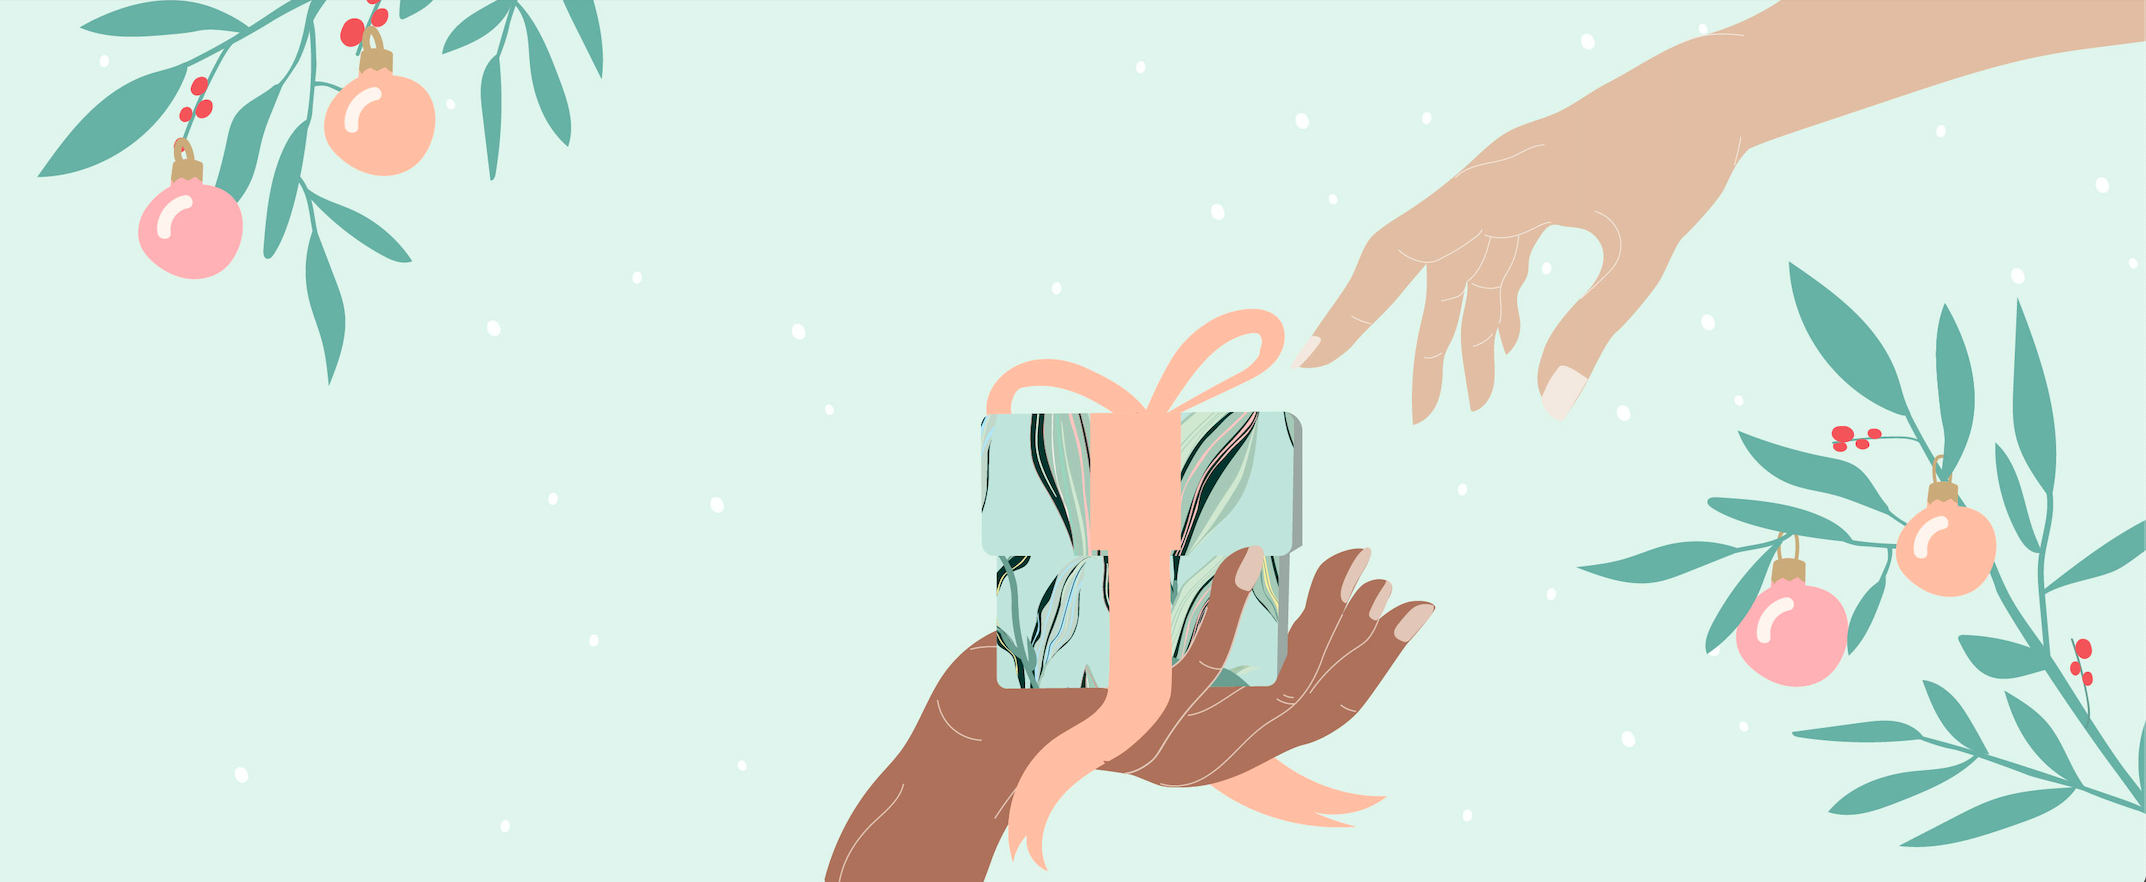 9 Self-Care Gift Ideas to Snag For Loved Ones (or Yourself!)